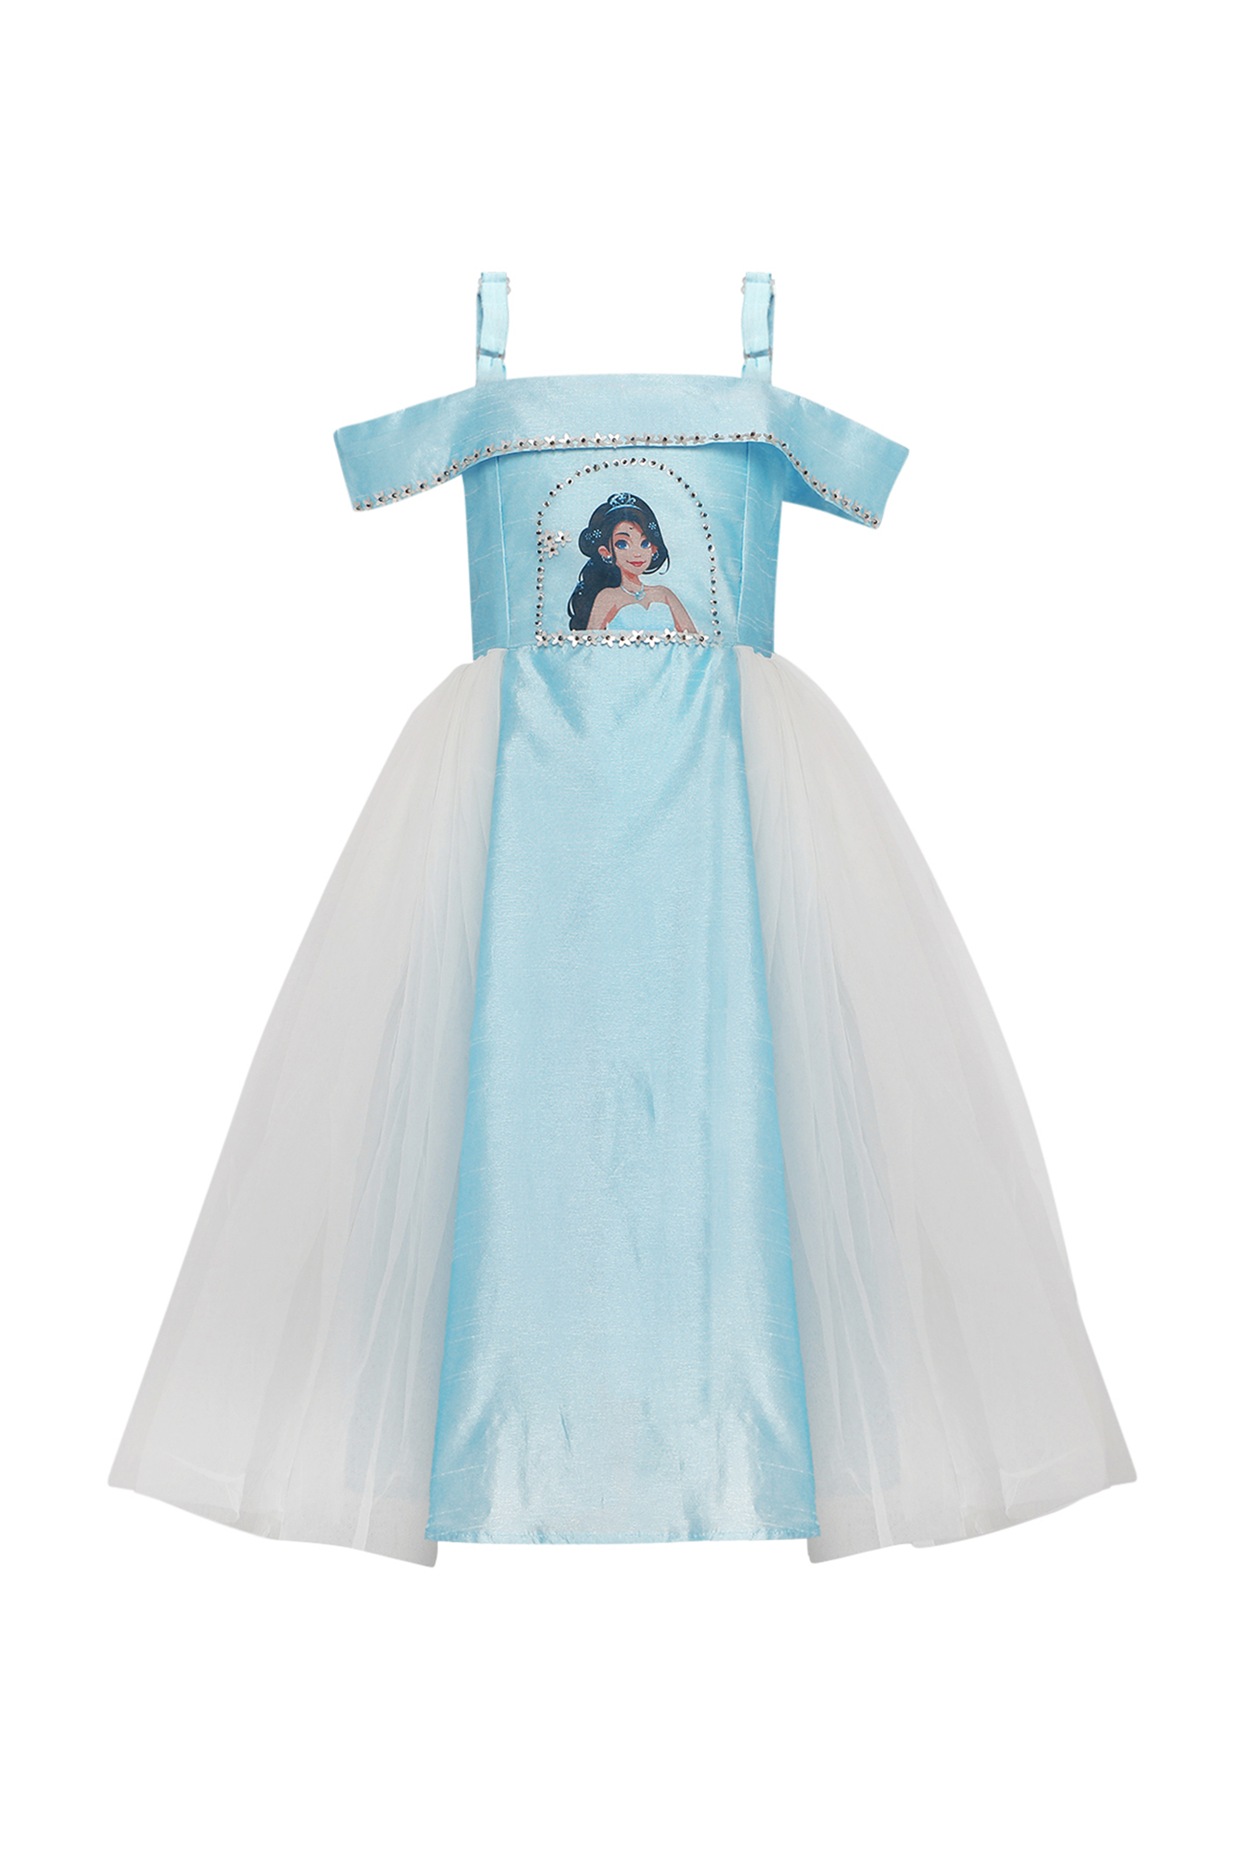 Buy cqdy Cinderella Princess Costume Dress (2-3 Year) Online at Low Prices  in India - Amazon.in